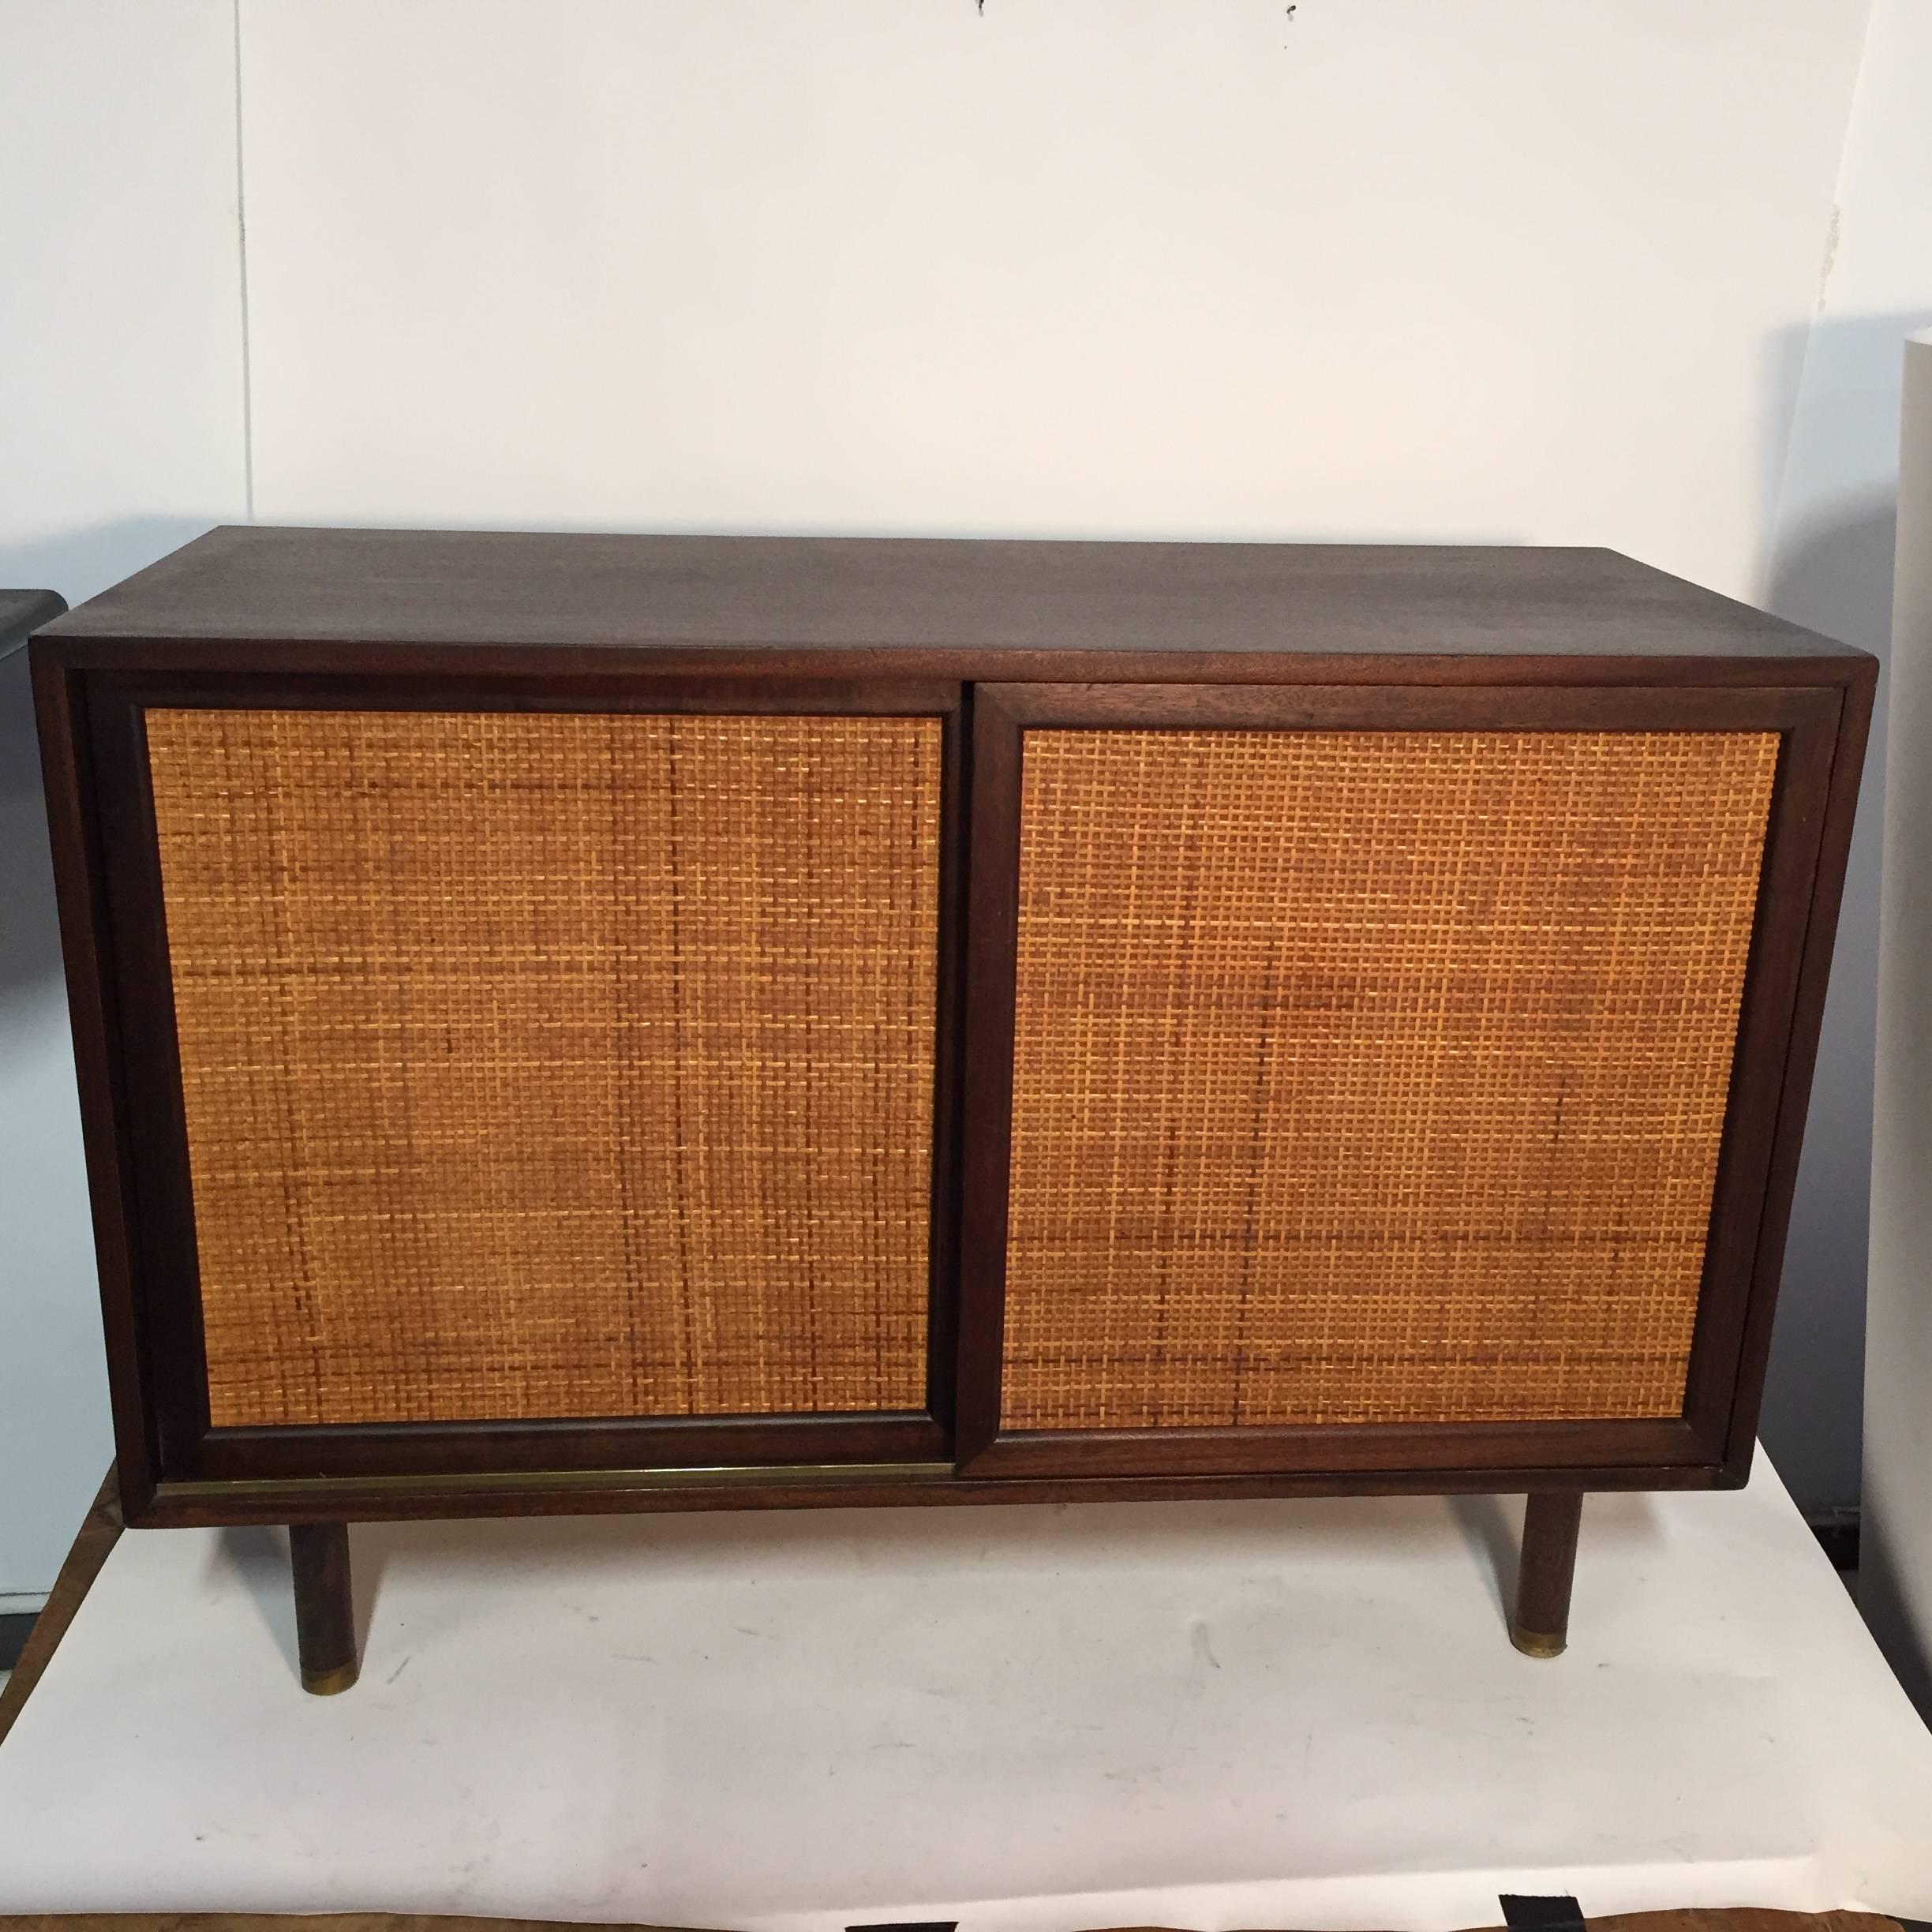 Small sideboard with two cane-fronted sliding doors hiding a bank of three lacquered drawers on one side, and an adjustable shelf on the other. Wonderful small dry bar, media cabinet, or dining room credenza. Brass hardware. Label to inside of top